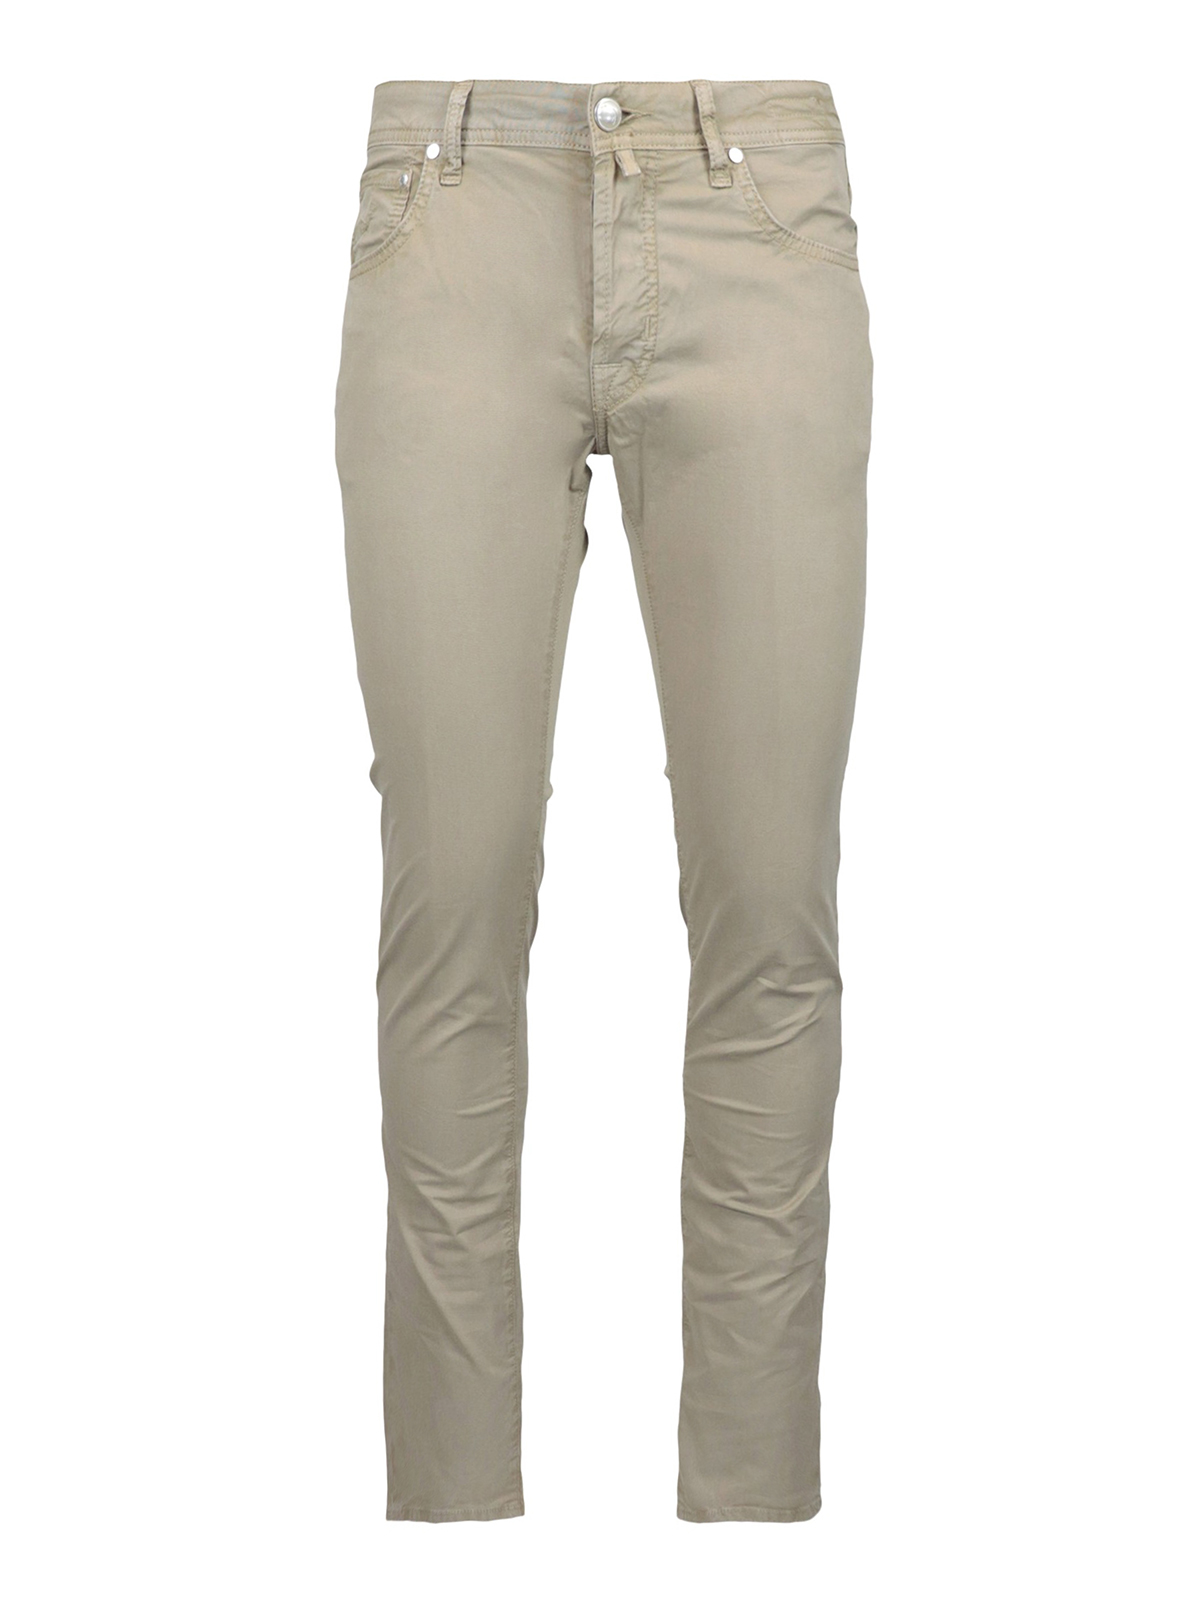 Jacob Cohen - Style 622 beige trousers - casual trousers ...